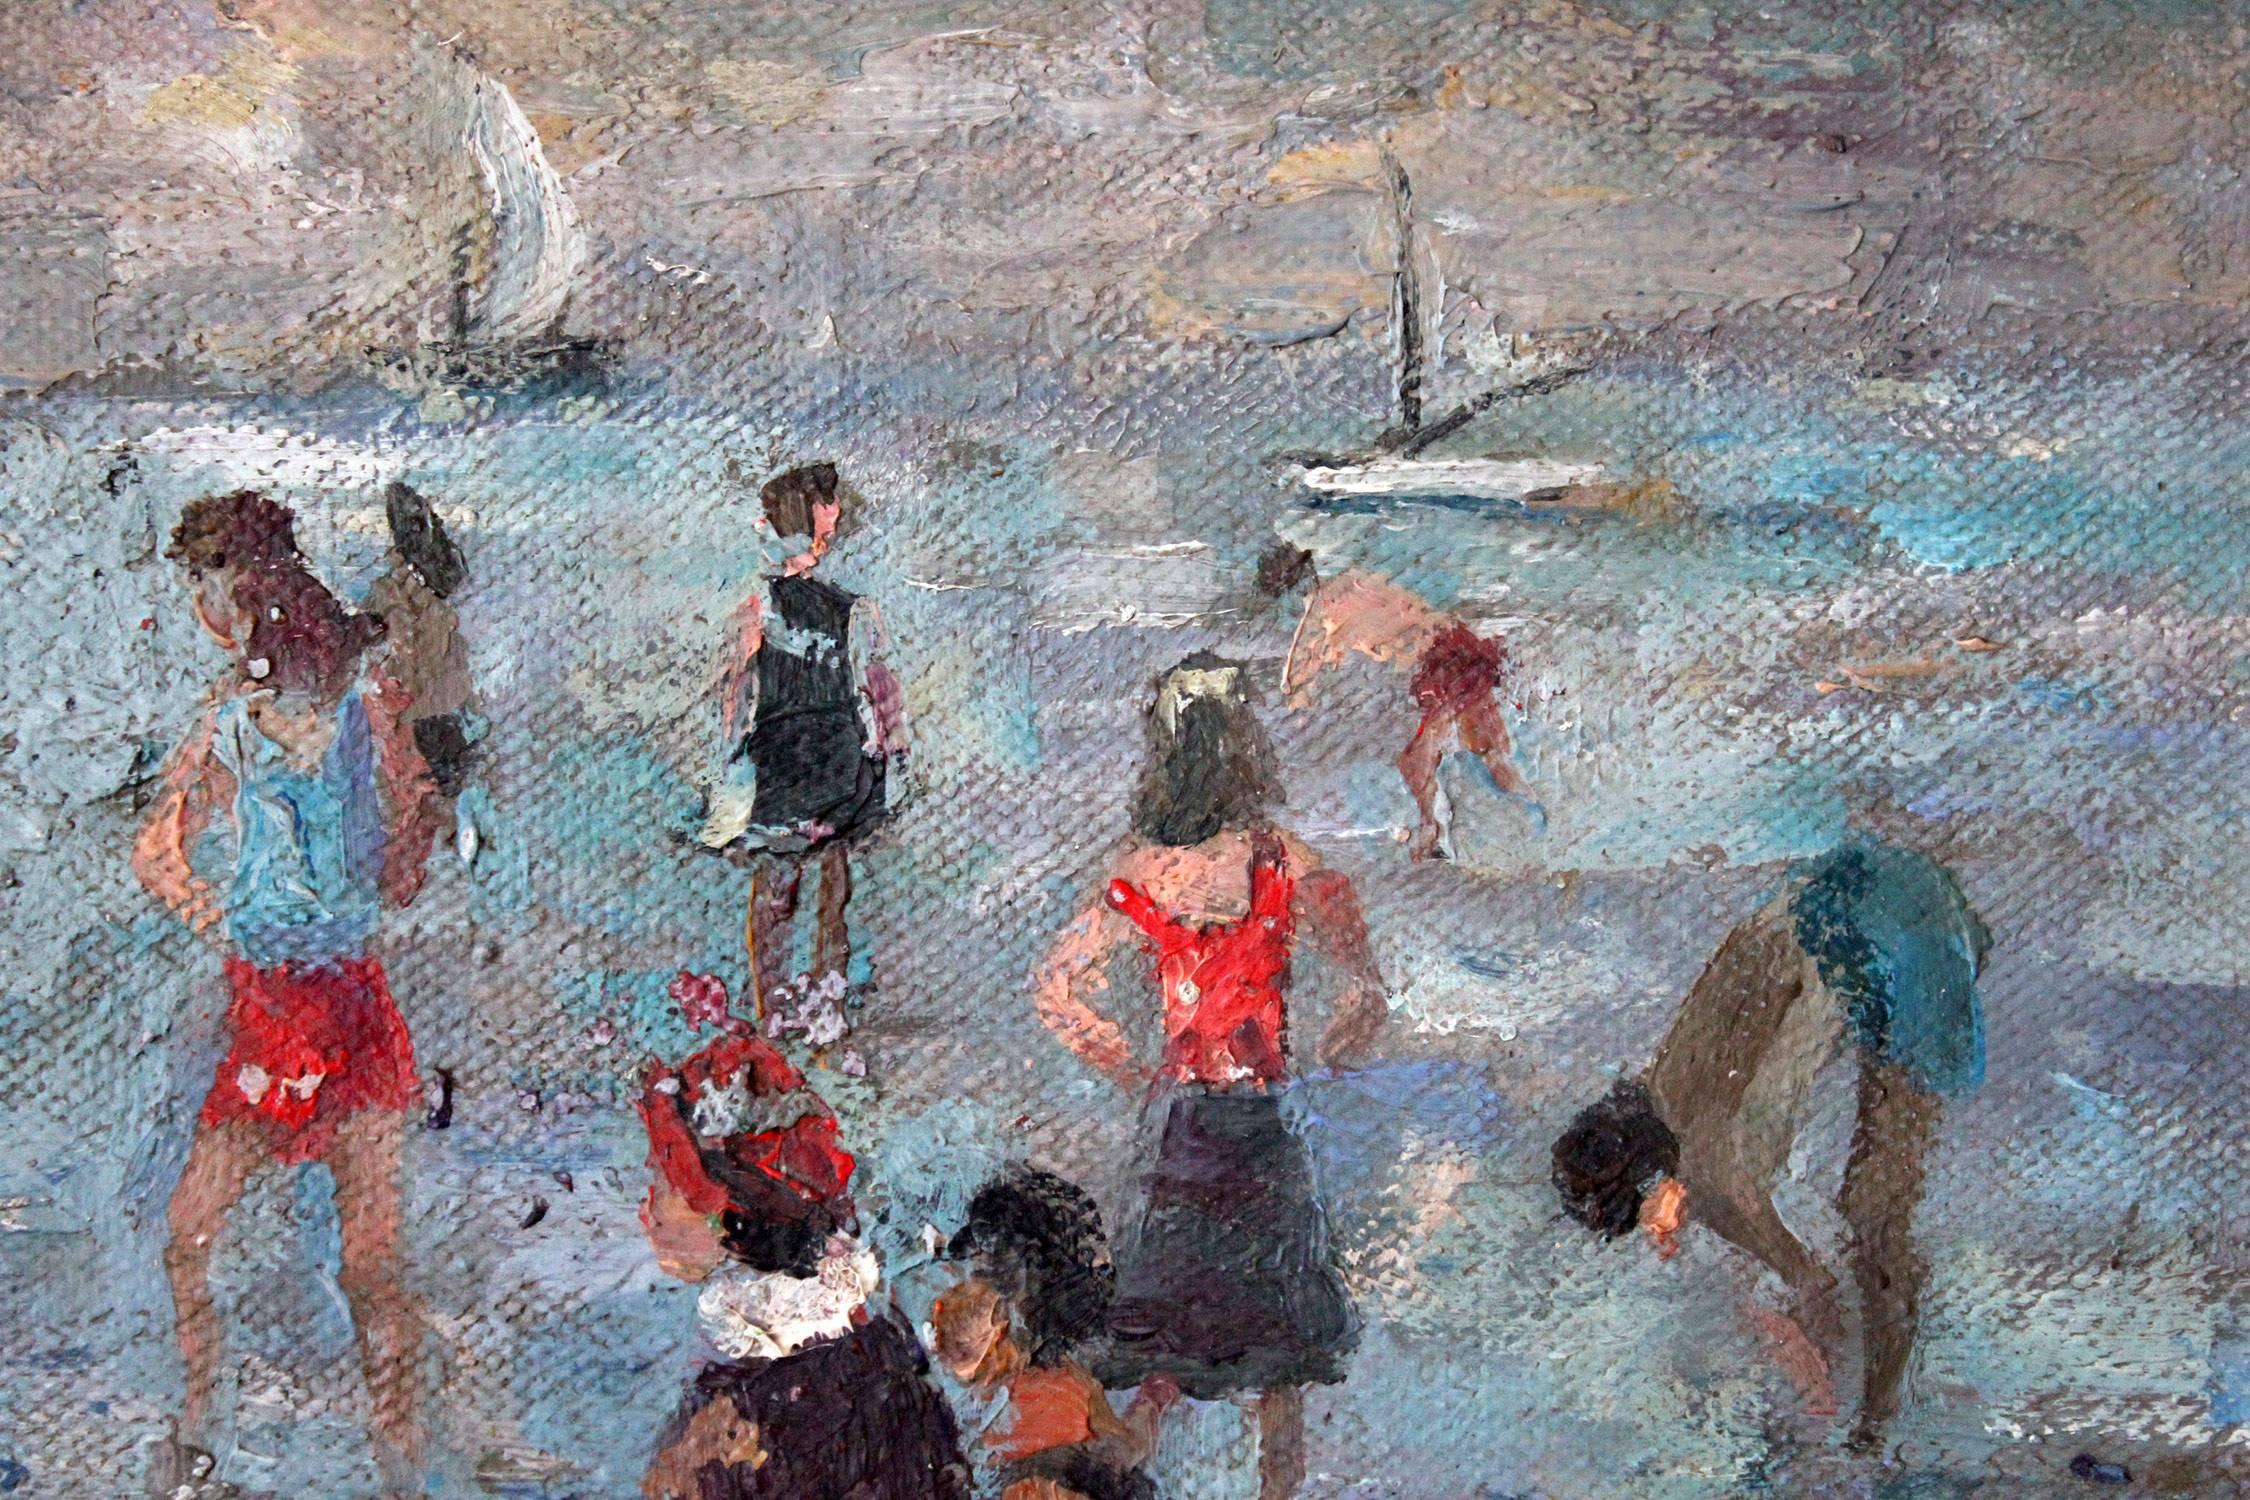 A marvelous oil depicting a beach scene with figures. One of France's most renowned artists, this piece is an excellent display of Hambourg's genre style beach scenes. Being influenced from his travels in Europe, the vibrancy of these locations come